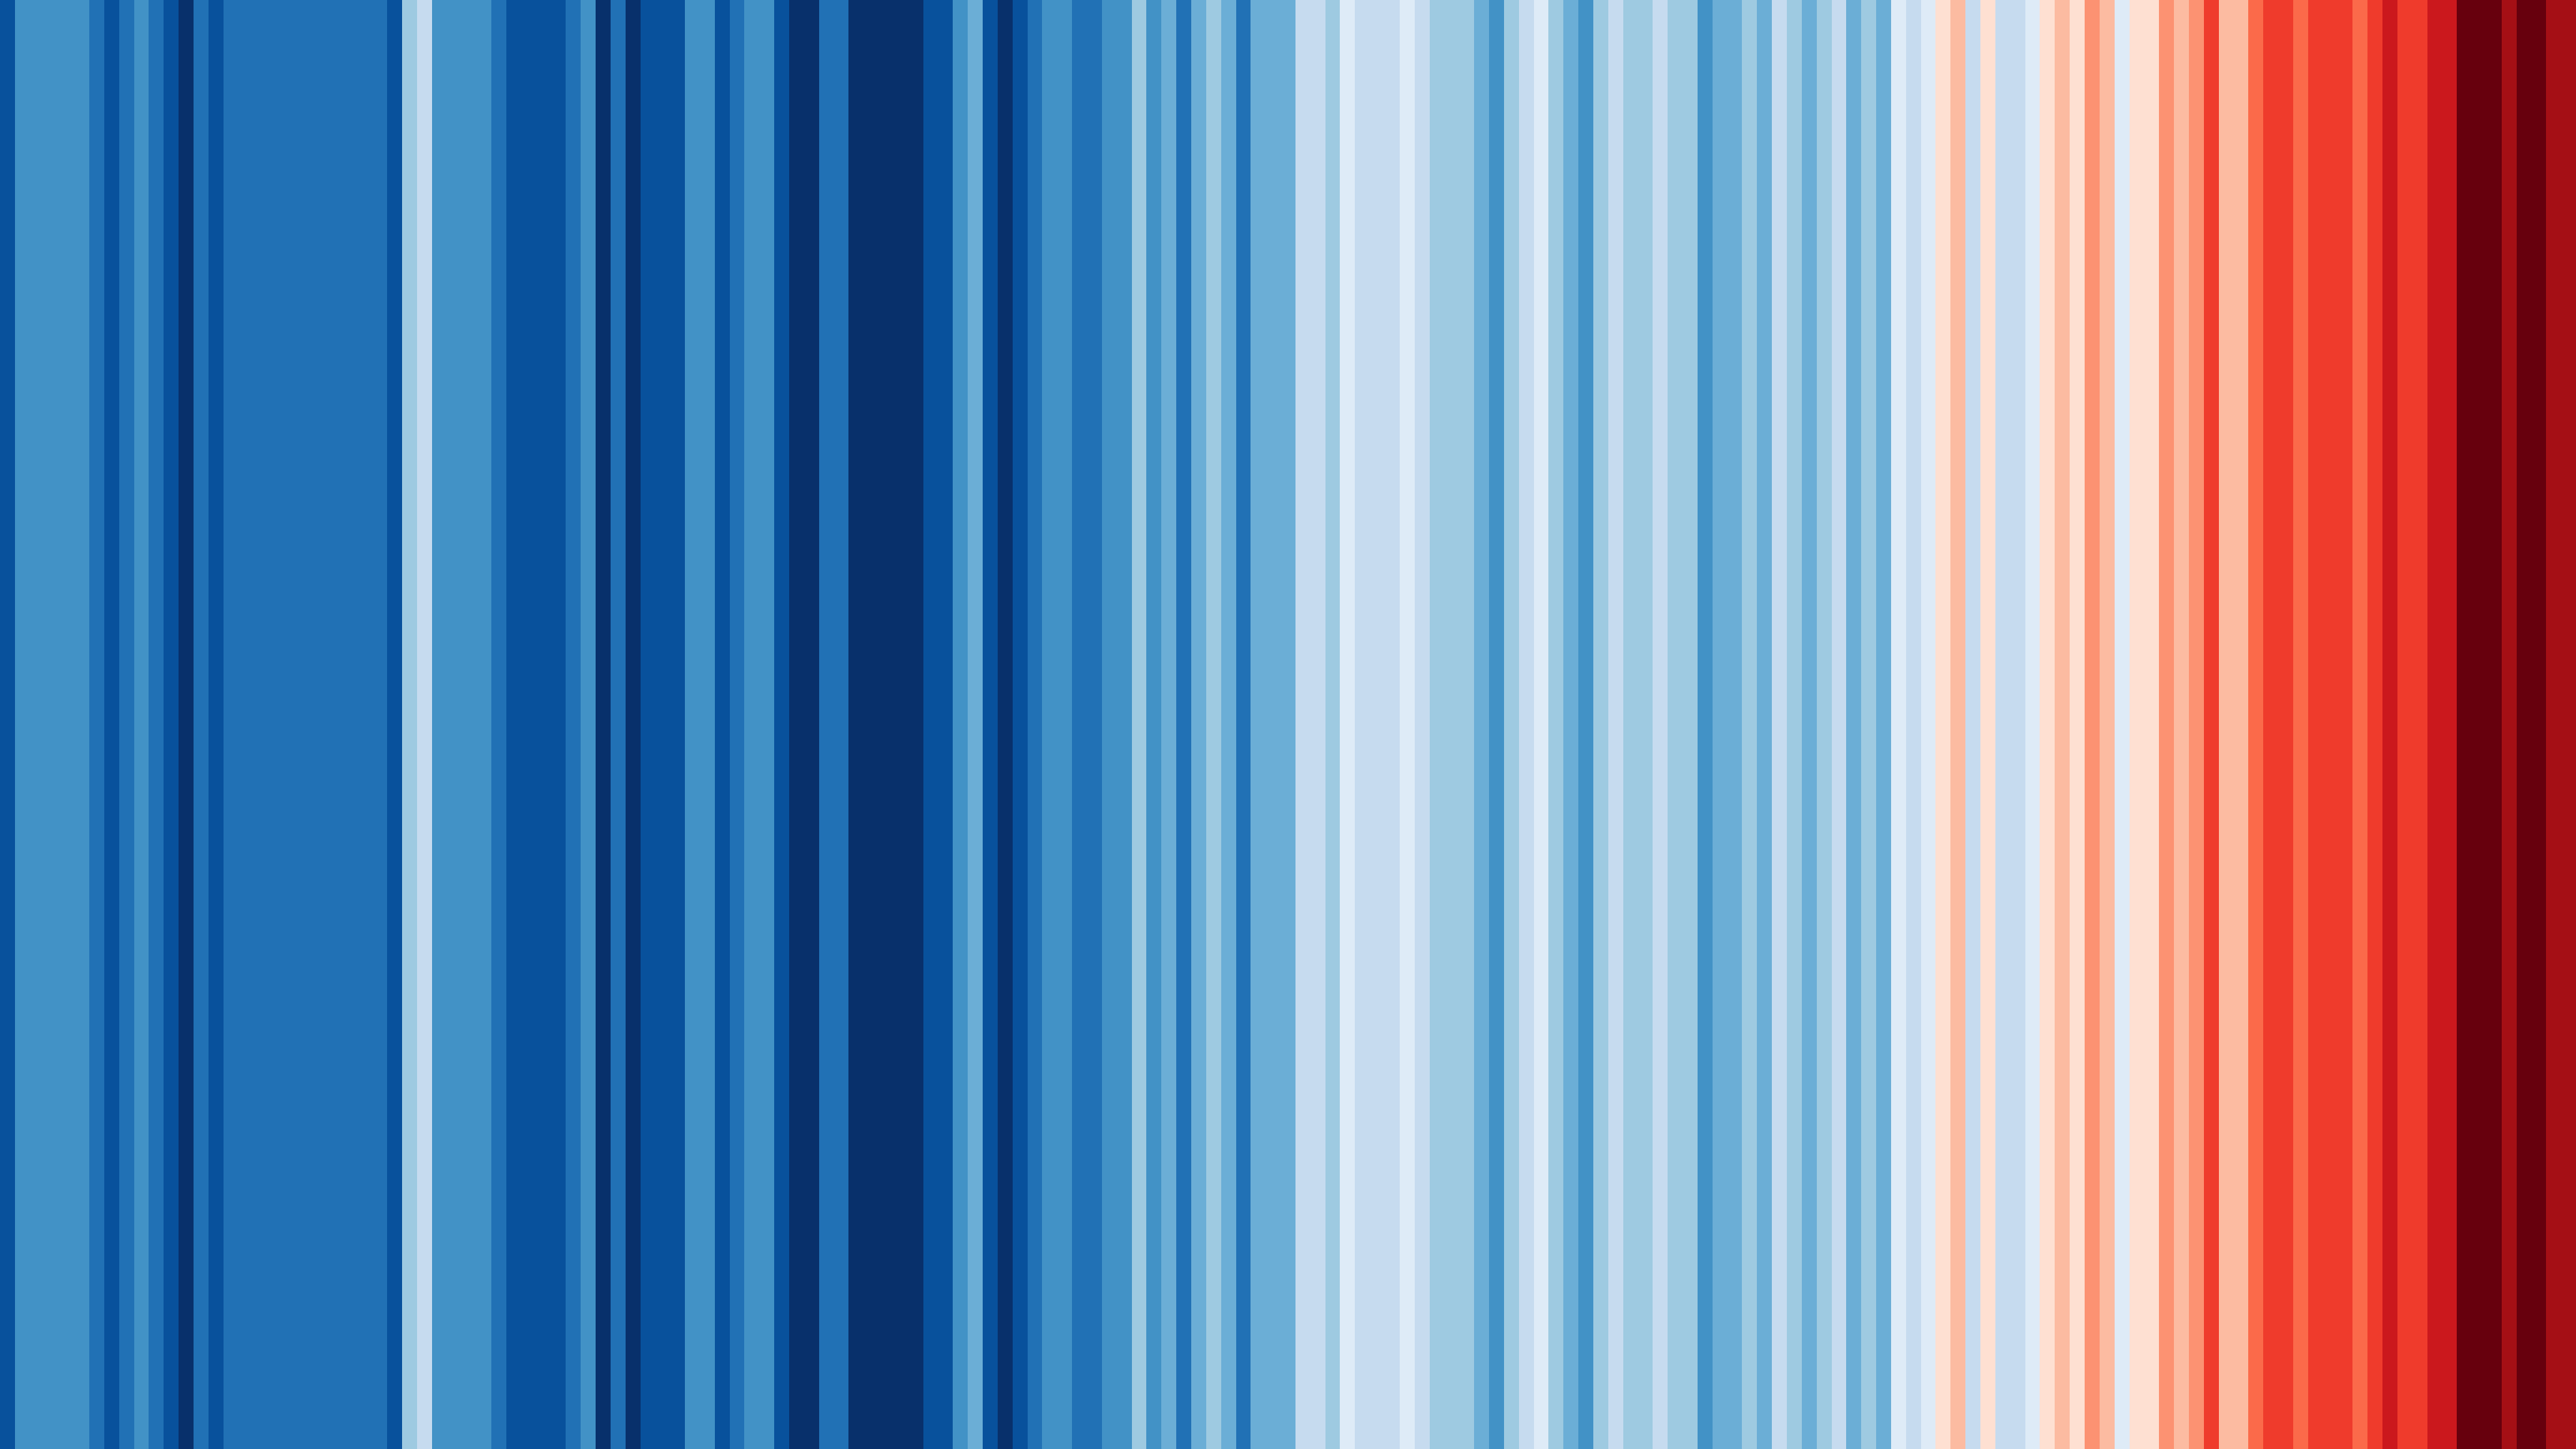 Warming Stripes: A representation of annual global temperatures from 1850 - 2022. Using color alone in a minimalist style climate scientist Ed Hawkins was able to intuitively convey global warming trends to the general public. The graphic has inspired many diverse applications around the world and is a powerful reminder of our climate crisis. (Ed Hawkins, National Centre for Atmospheric Science, University of Reading, using Data from Berkeley Earth, NOAA, UK Met Office, MeteoSwiss, DWD, SMHI, UoR & ZAMG, CC BY 4.0 via https://showyourstripes.info/).